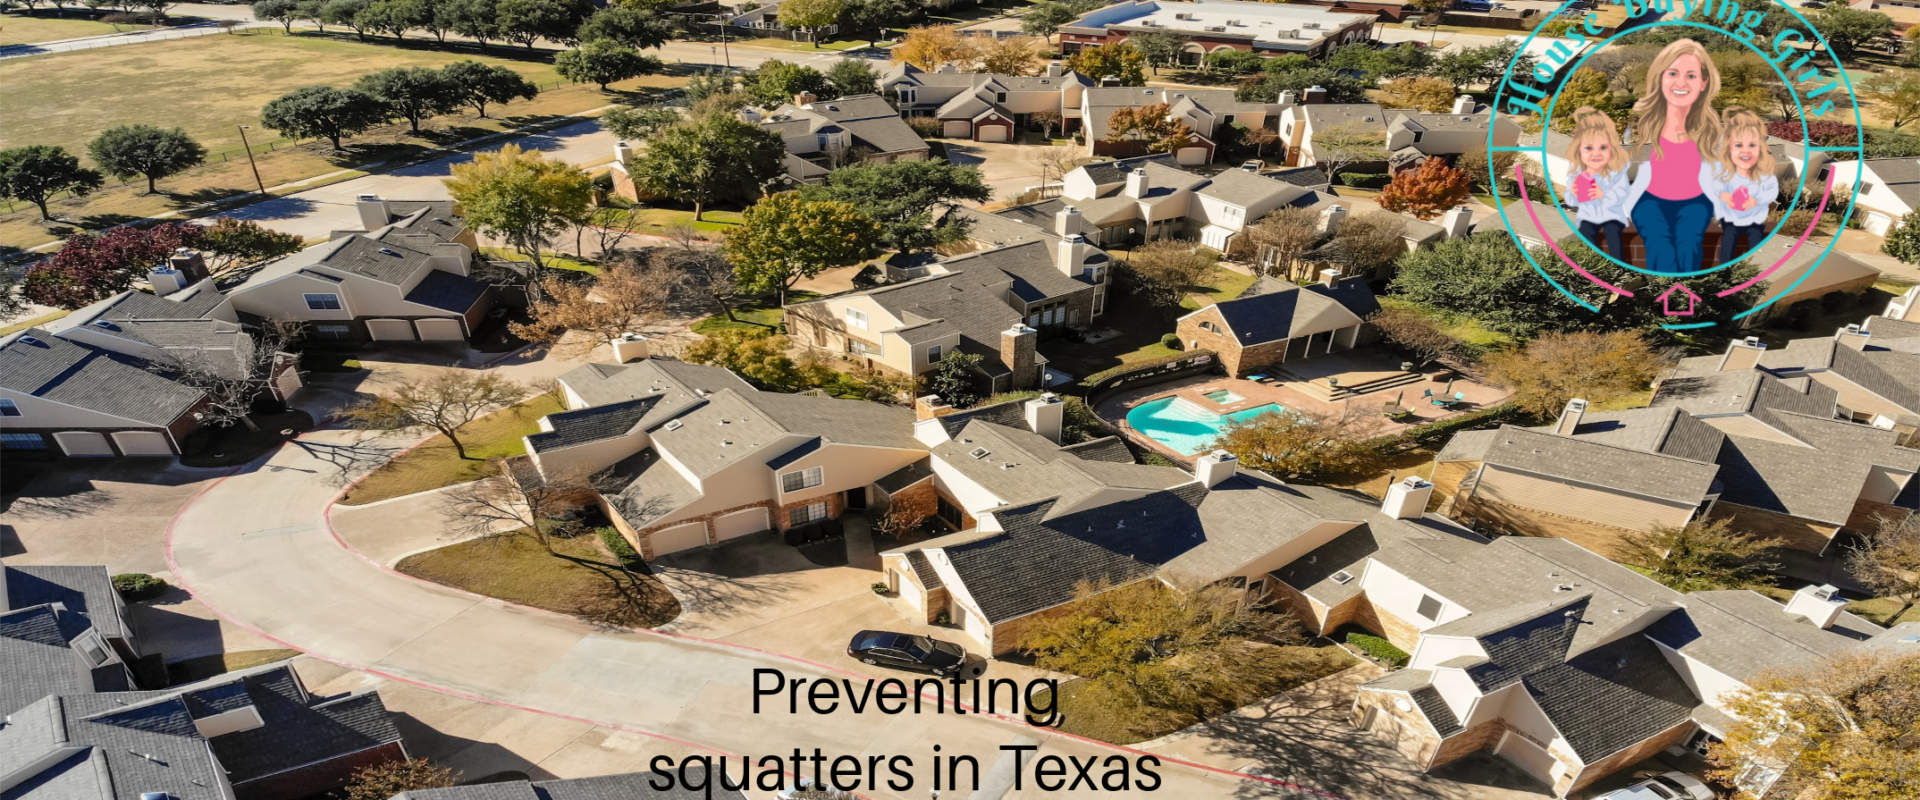 preventing squatters in Texas